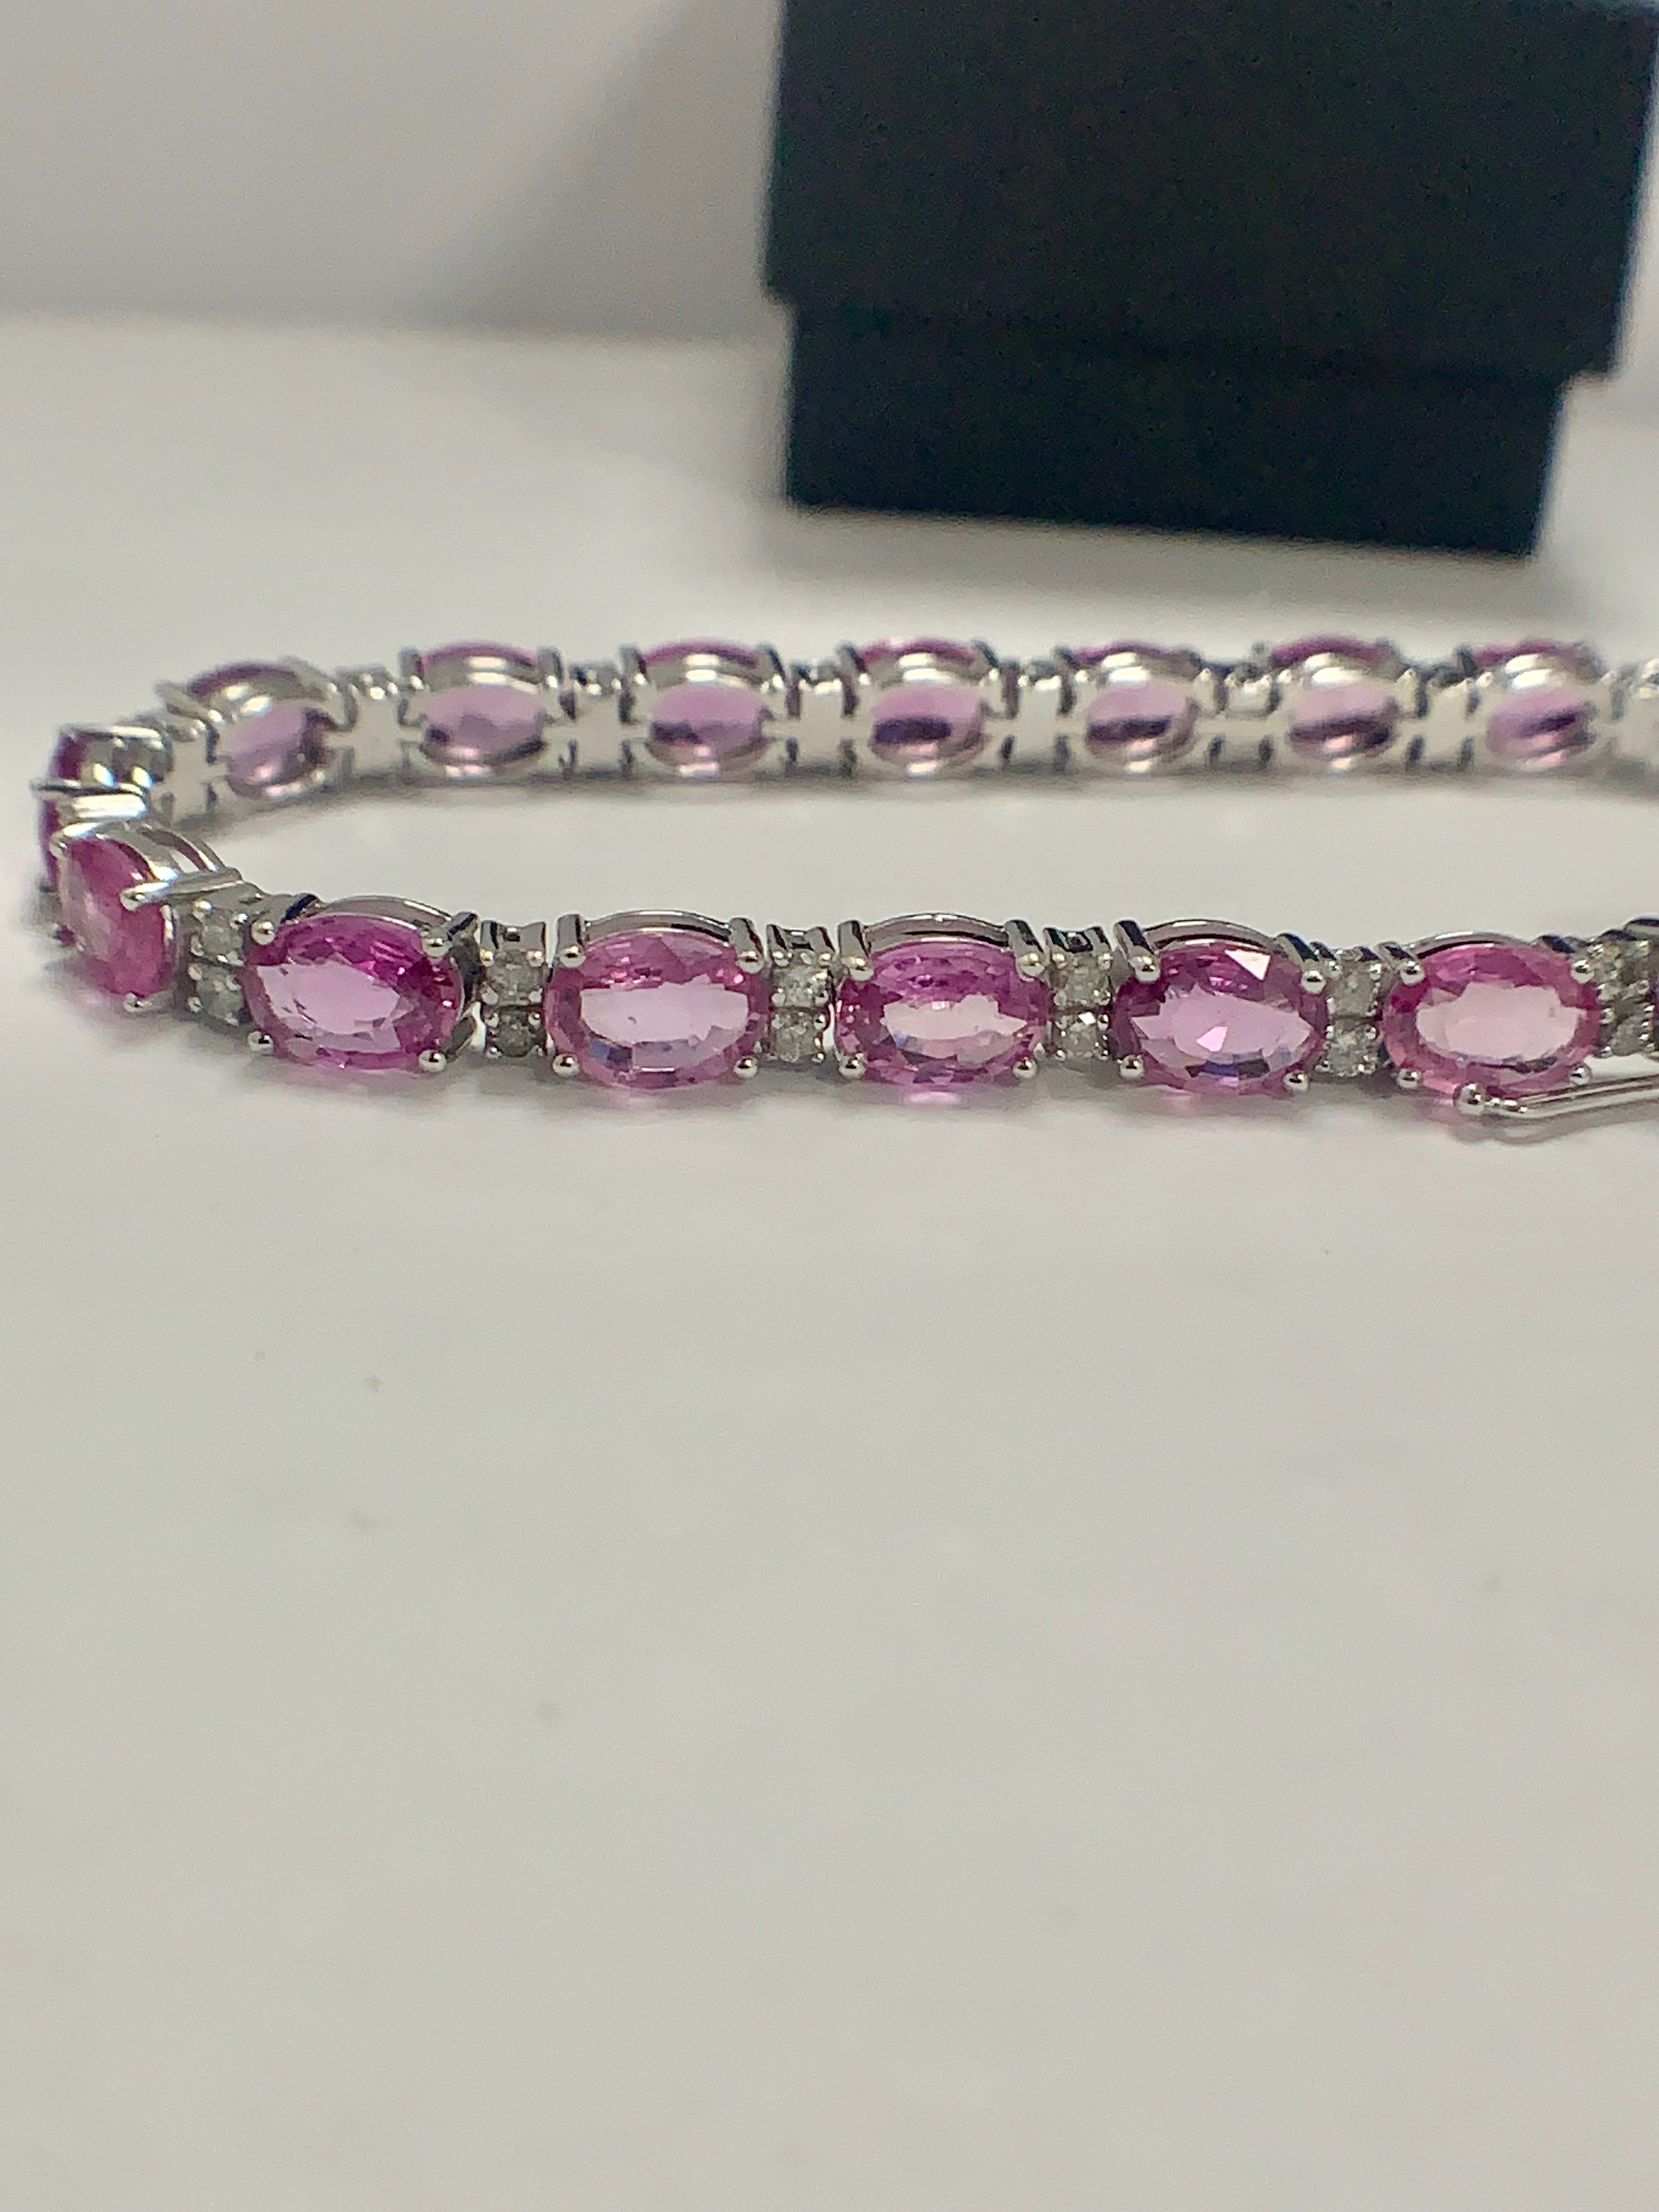 14ct White Gold Sapphire and Diamond bracelet featuring, 19 oval cut, pink Sapphires (15.93ct TSW) - Image 8 of 11